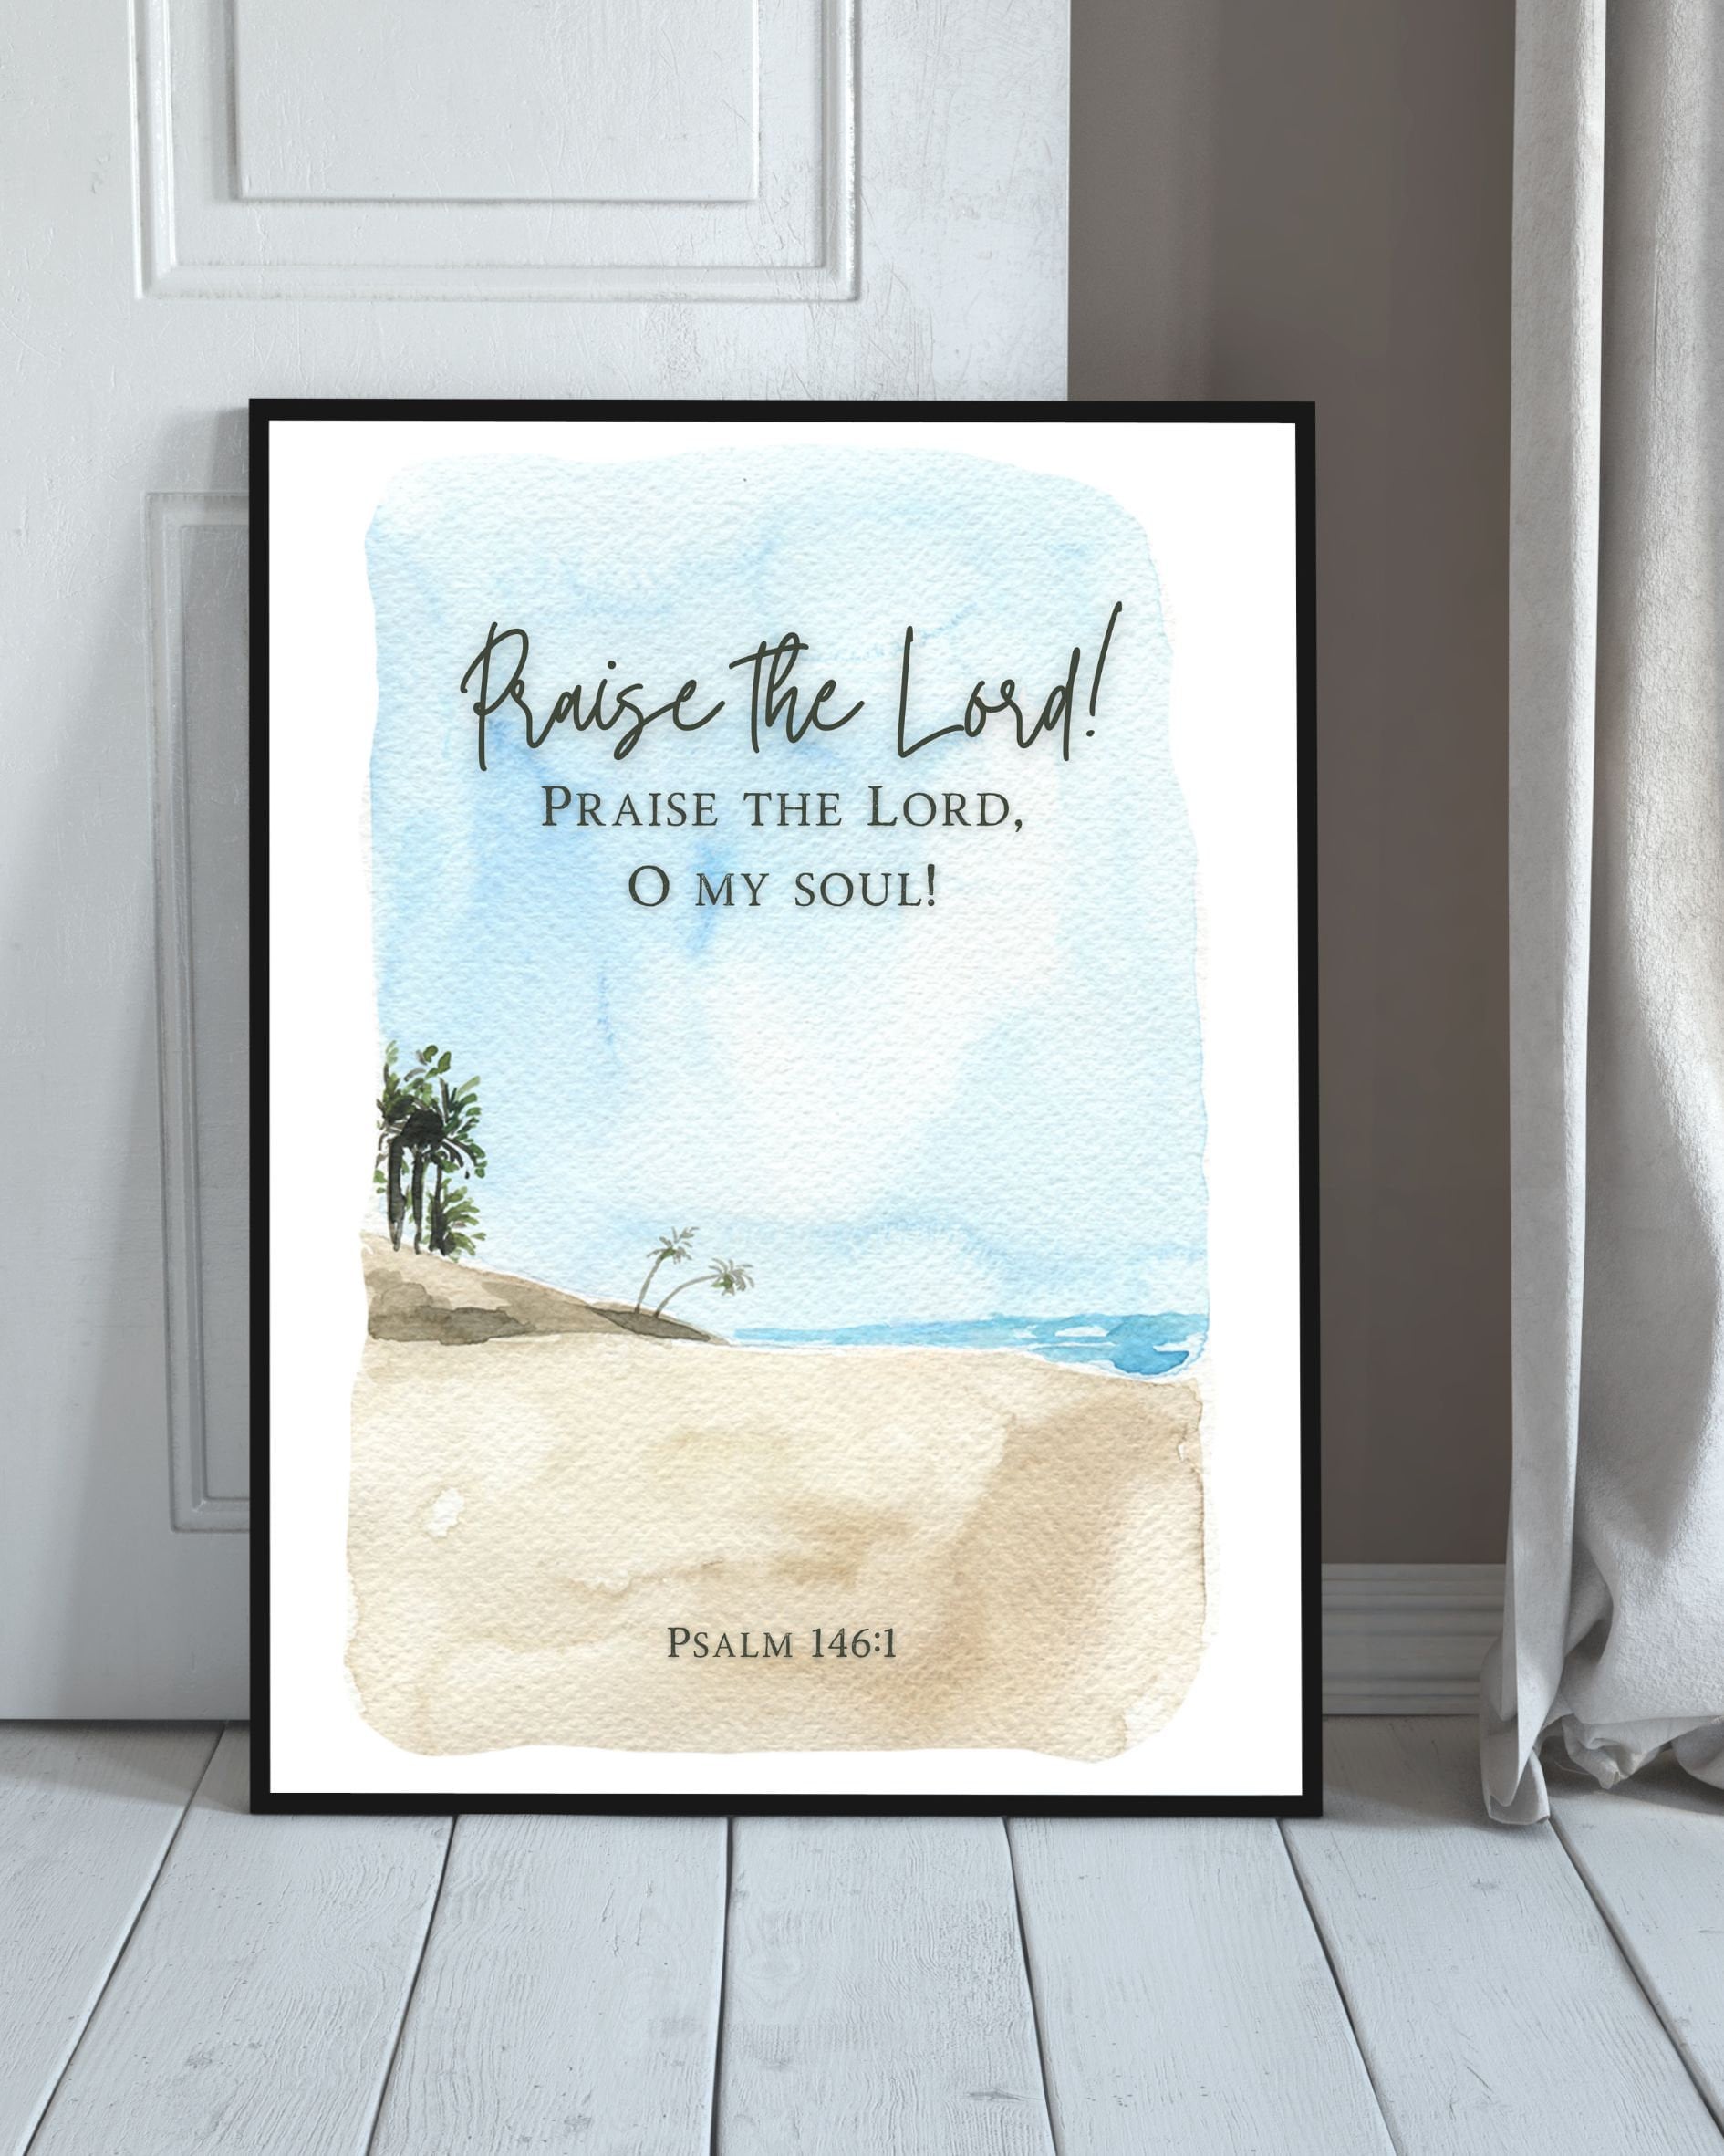 Psalm 146:1 Praise The Lord - Floater Frame Painting on Canvas Orren Ellis Format: Silver Framed, Size: 31.5 H x 31.5 W x 1 D